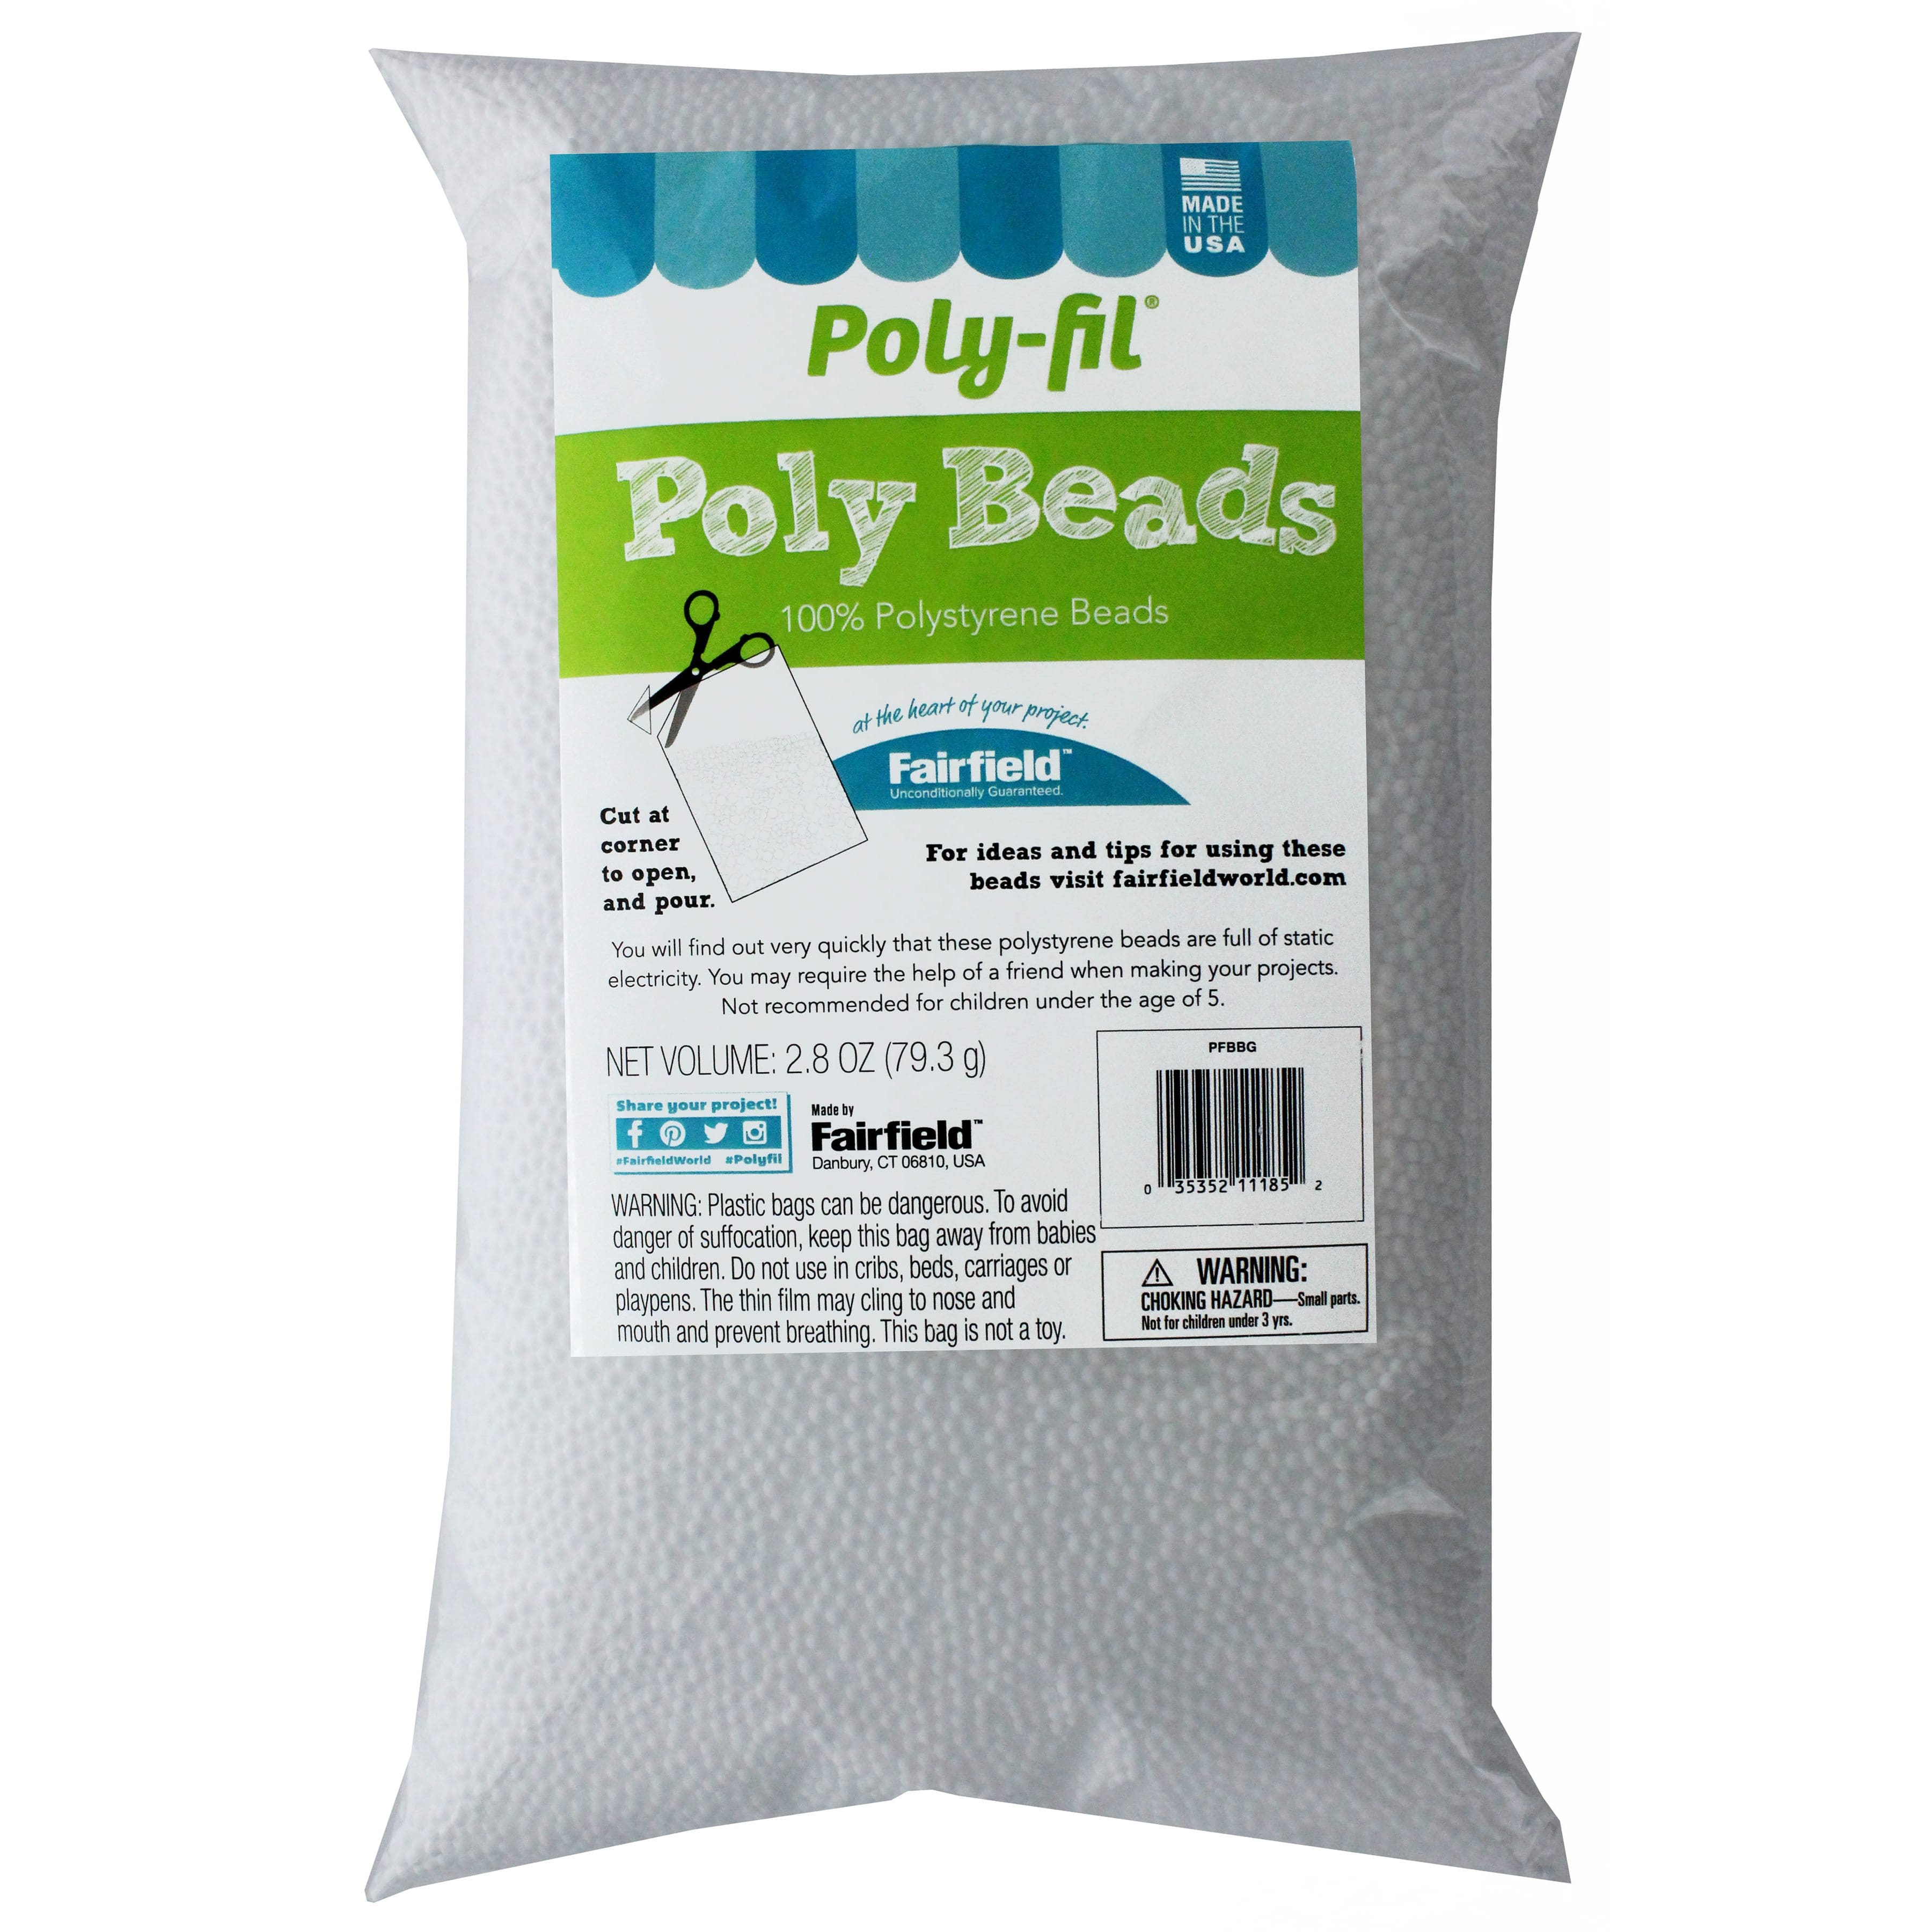 Where we can use polystyrene beads